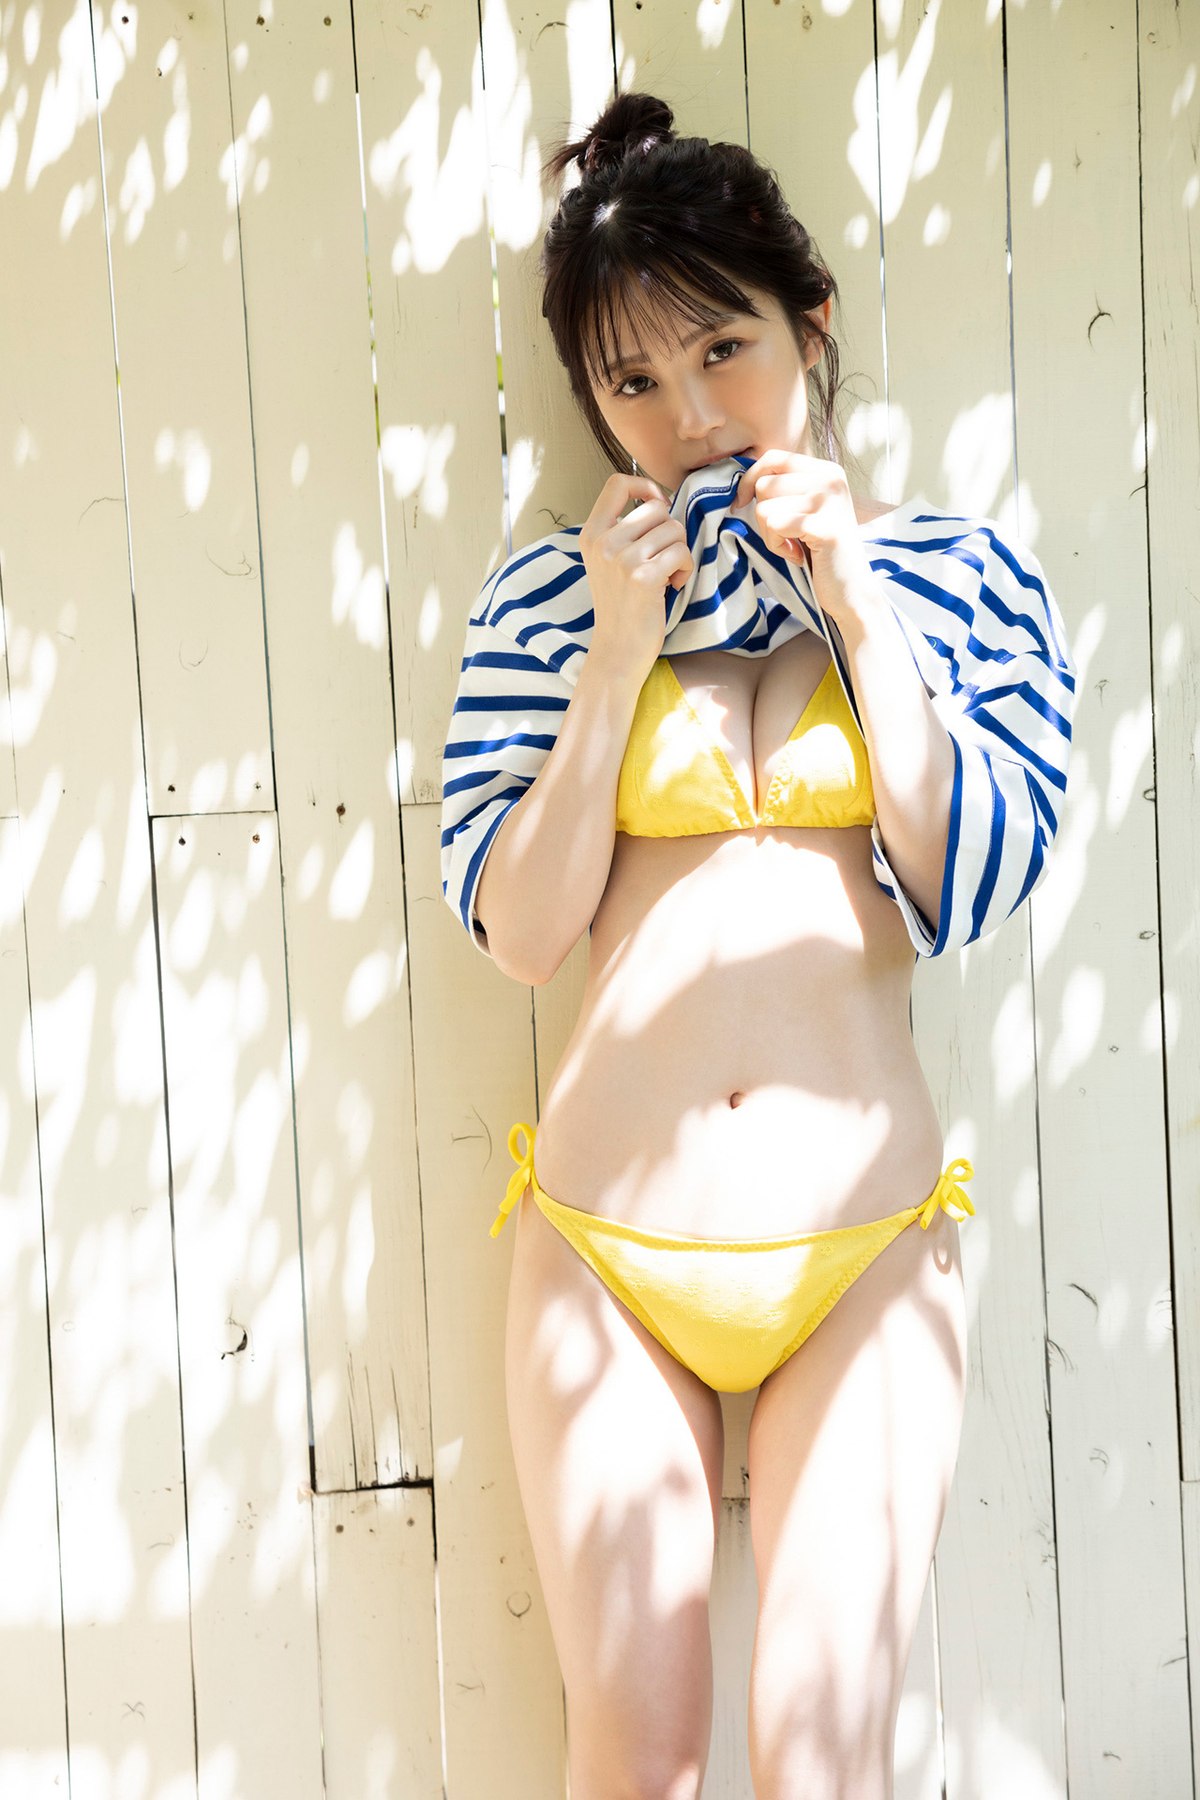 FLASH Photobook 2023 06 20 Tsumugi Hashimoto 橋本つむぎ The Best In Osaka Is The Best In Japan 0026 1201747032.jpg